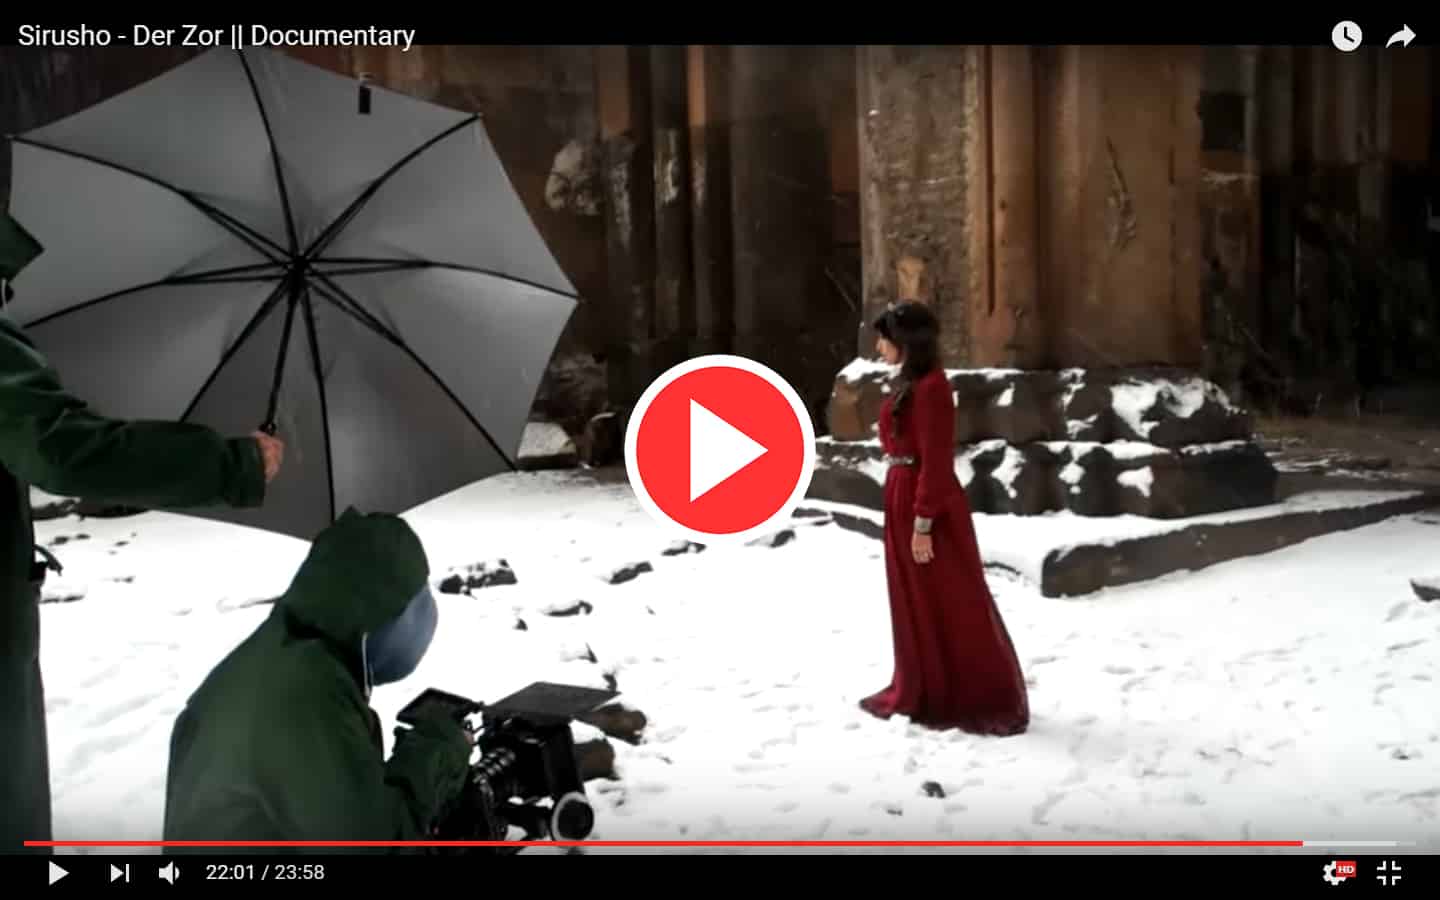 Sirusho Struggles Filming “Der Zor” in Ancient Ani ( Documentary)